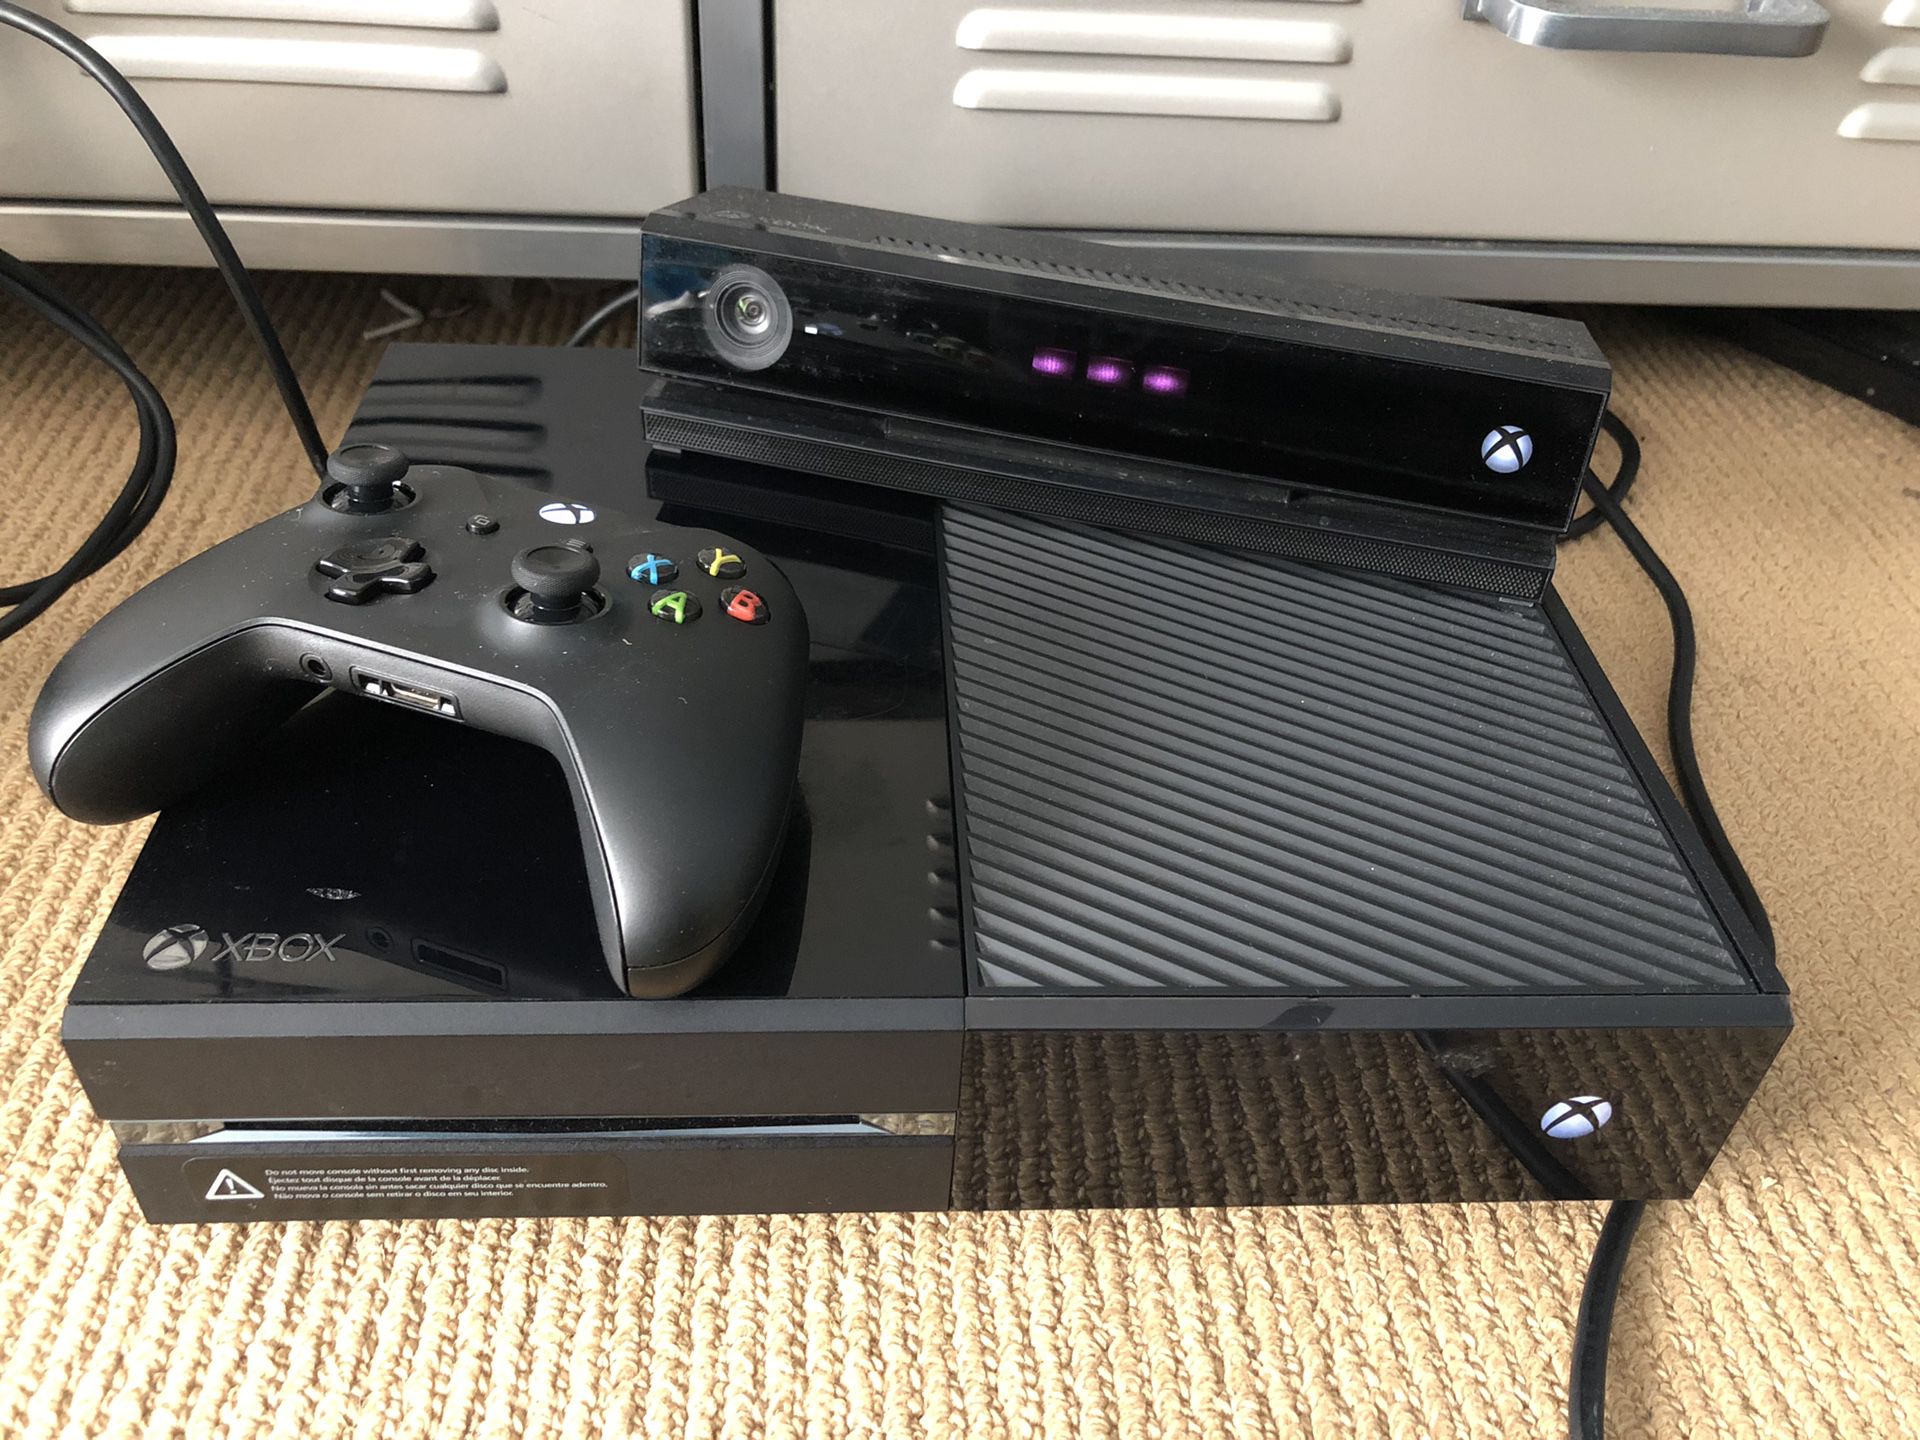 Xbox One (500 GB) w/ controller & cords included